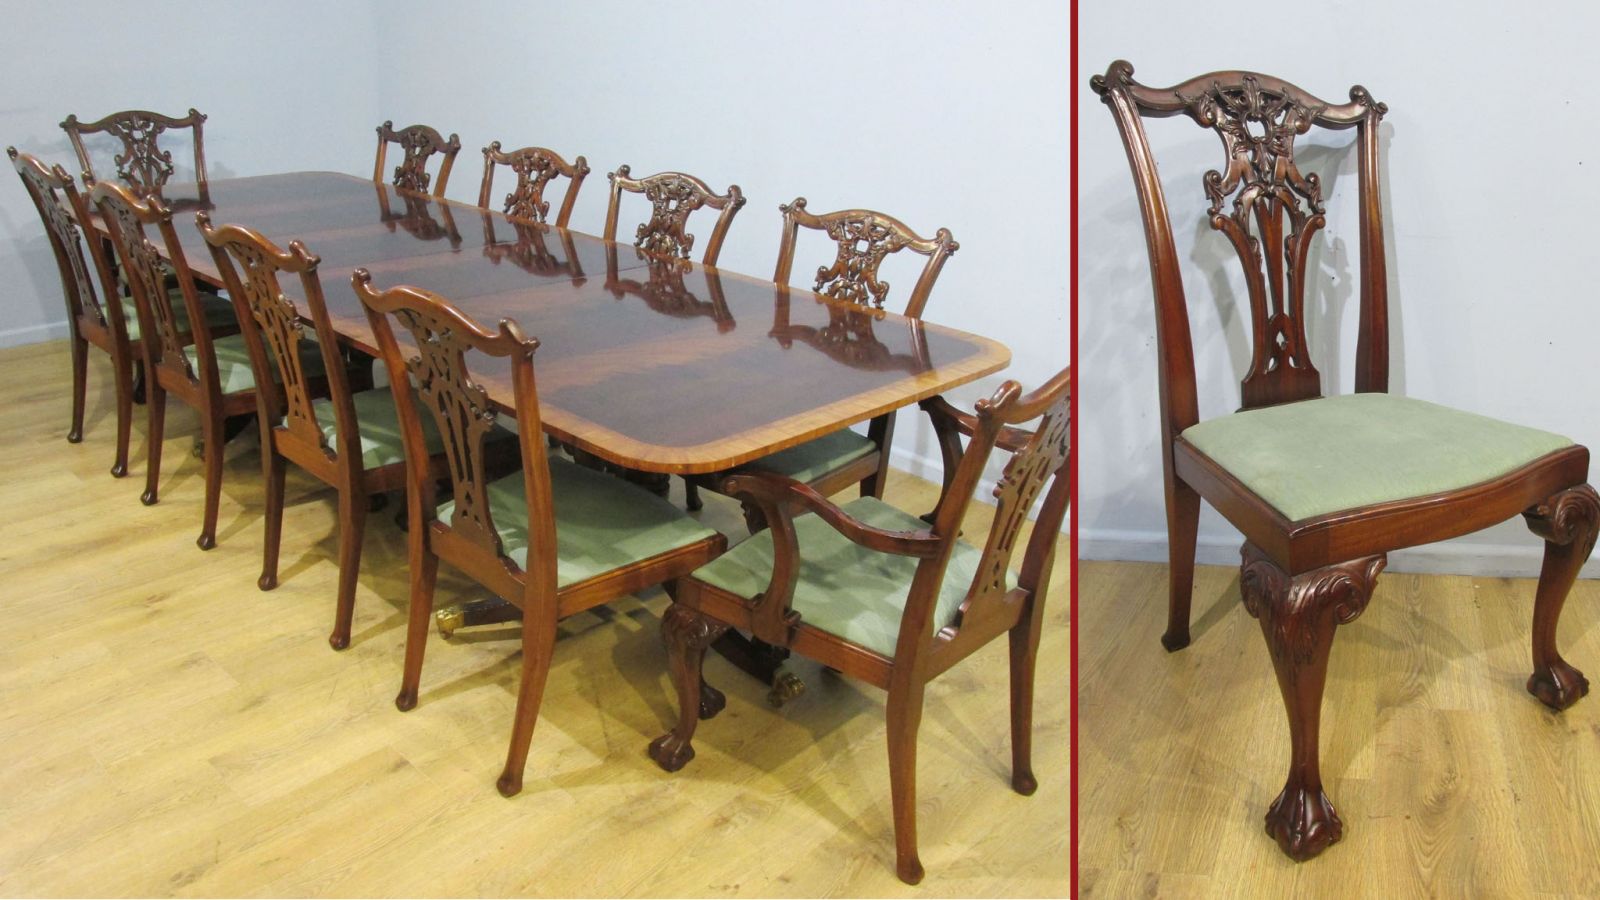 Regency Pedetal Table and set of Chippendale chairs